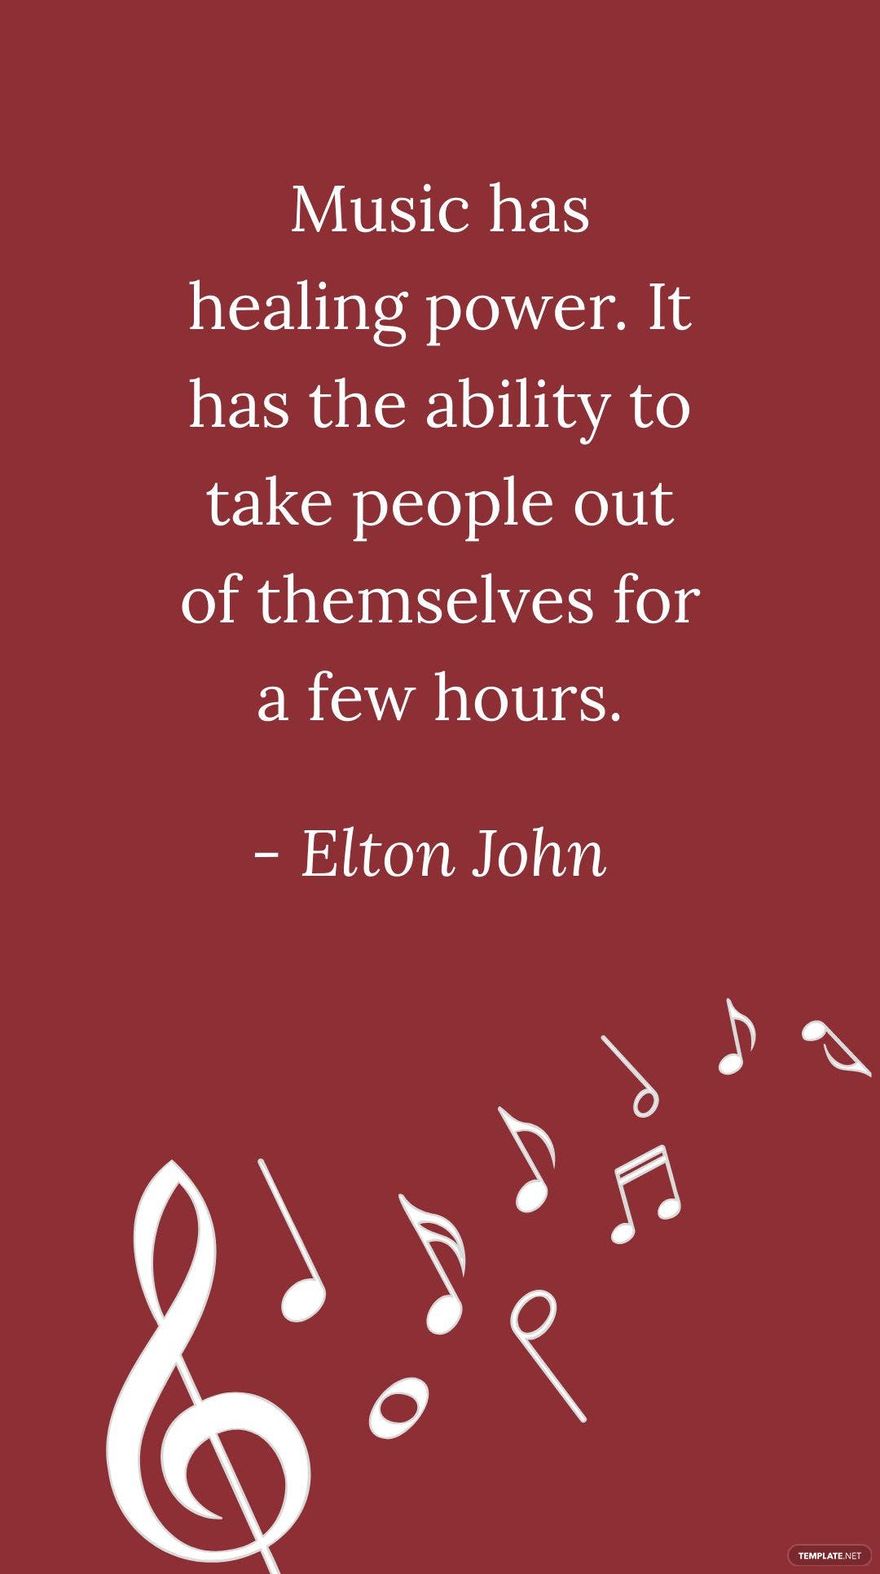 Elton John - Music has healing power. It has the ability to take people out of themselves for a few hours.